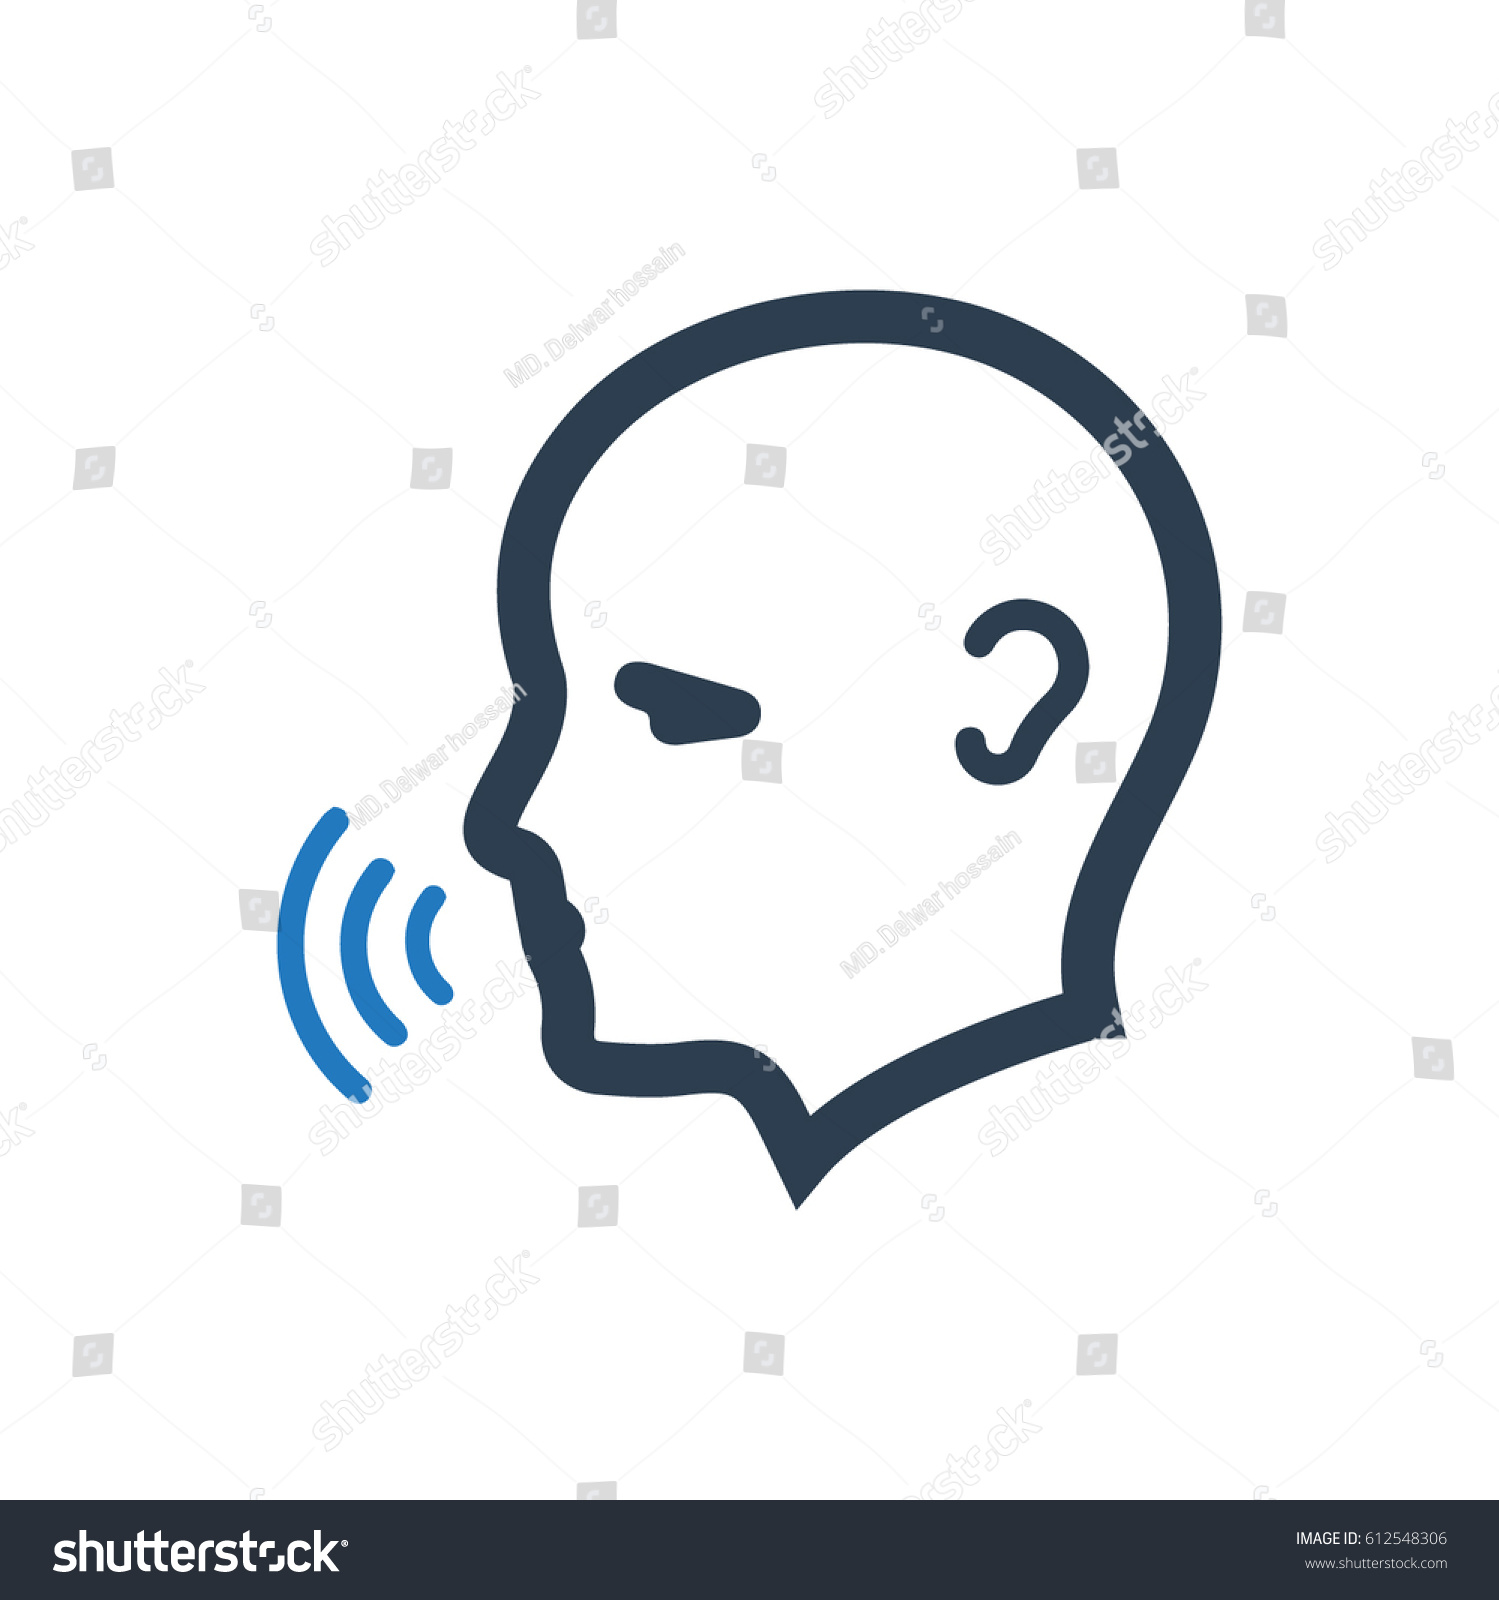 Voice Recognition Icon Stock Vector (Royalty Free) 612548306 - Shutterstock